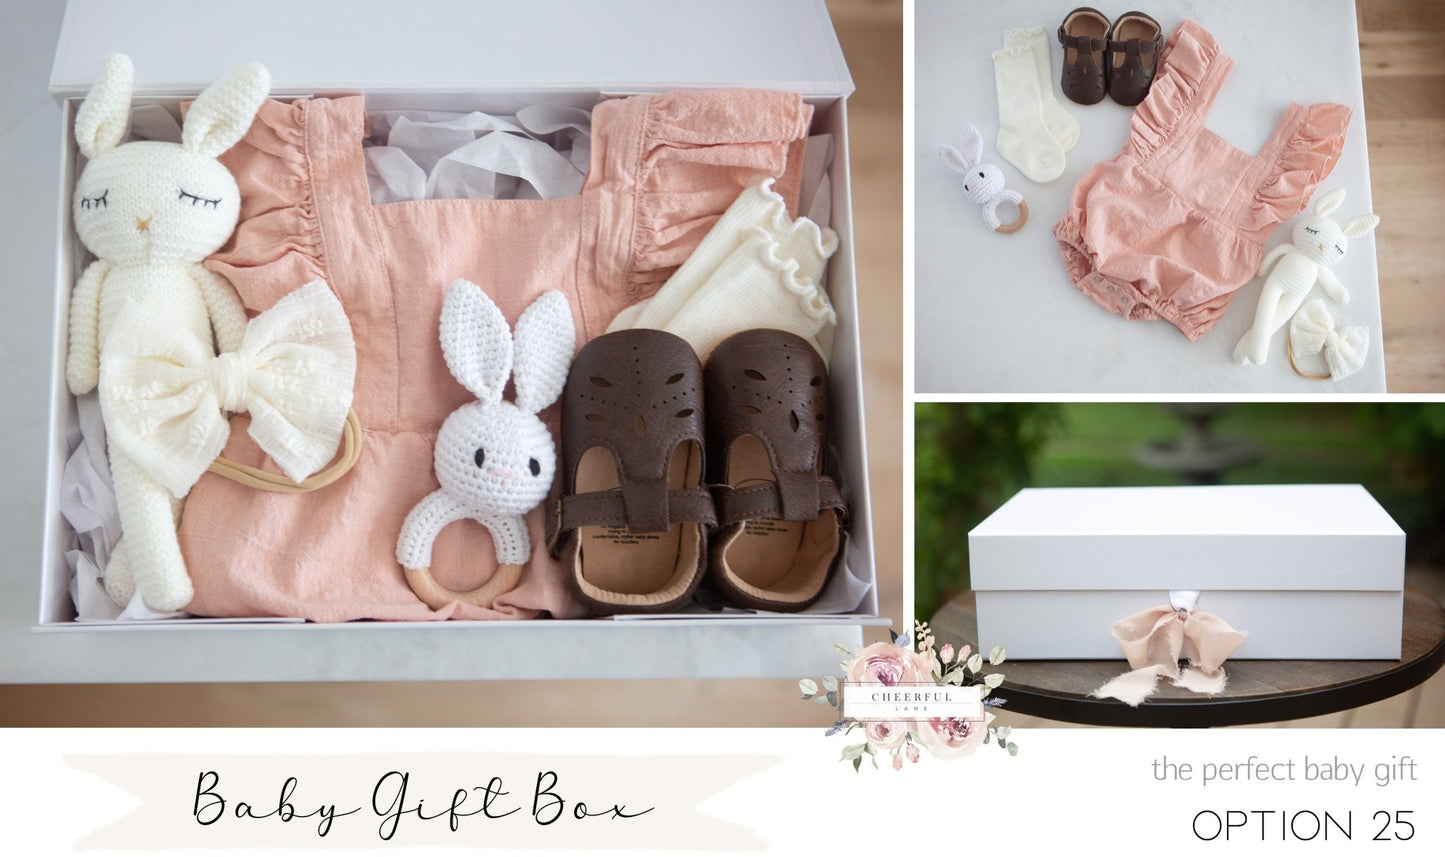 Baby Girl Gift Box Set with personalized gift tag - Cheerful Lane